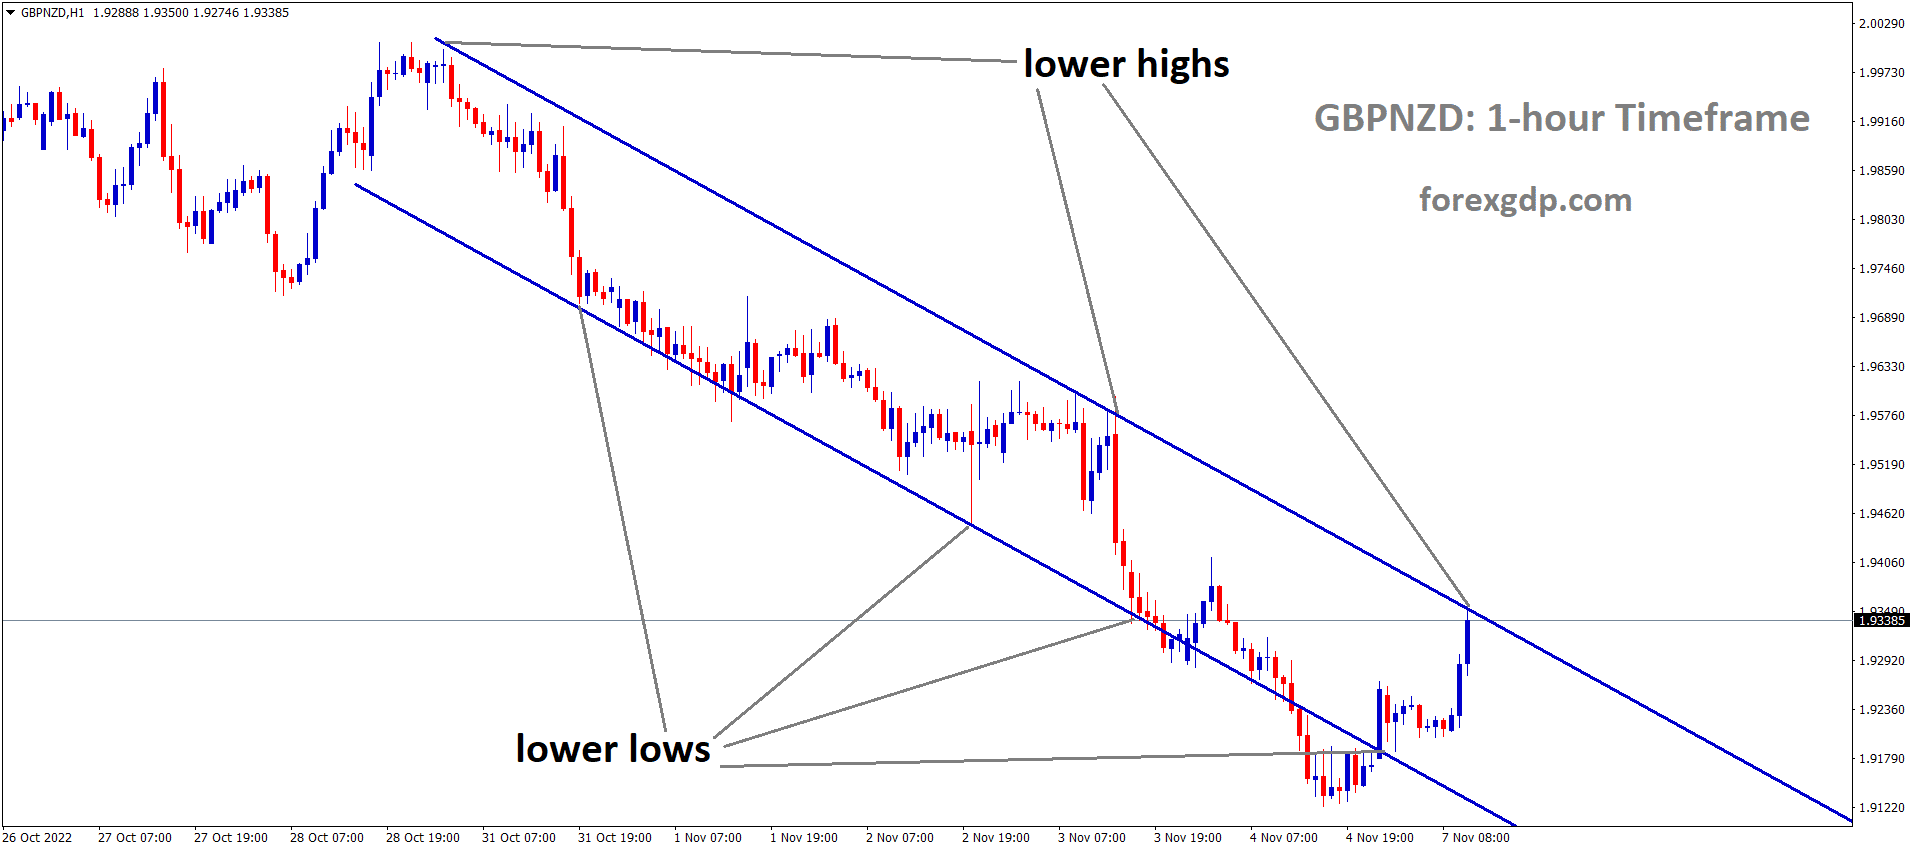 GBPNZD is moving in the Descending channel and the market has reached the lower high area of the channel